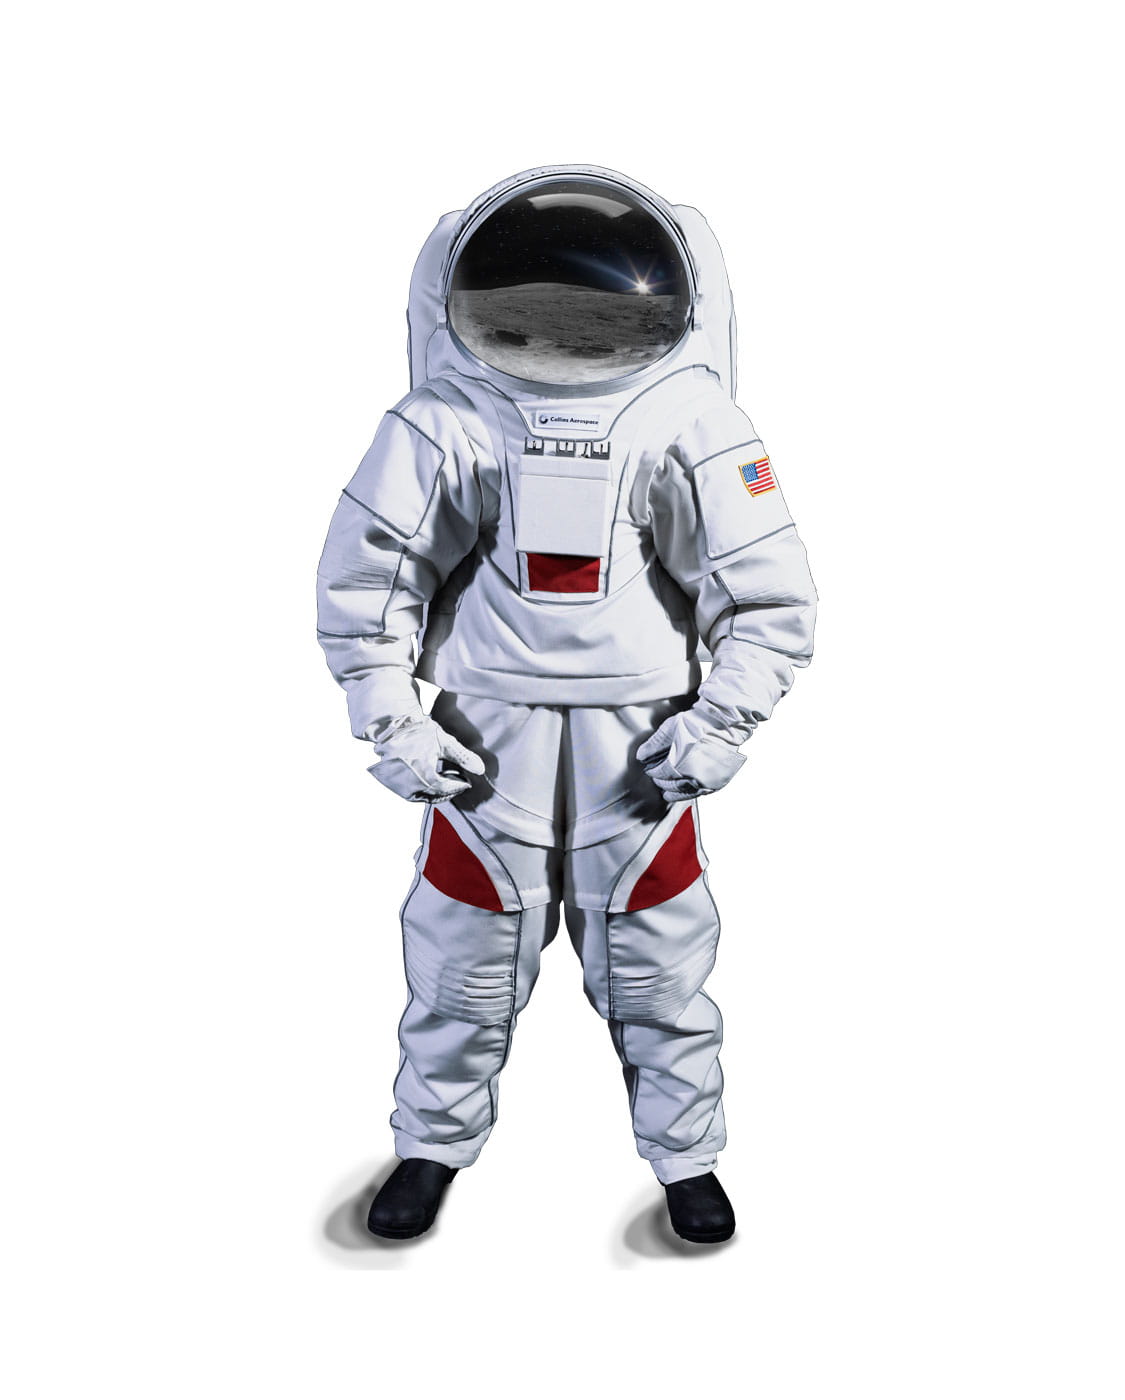 View of the front of the next generation space suit